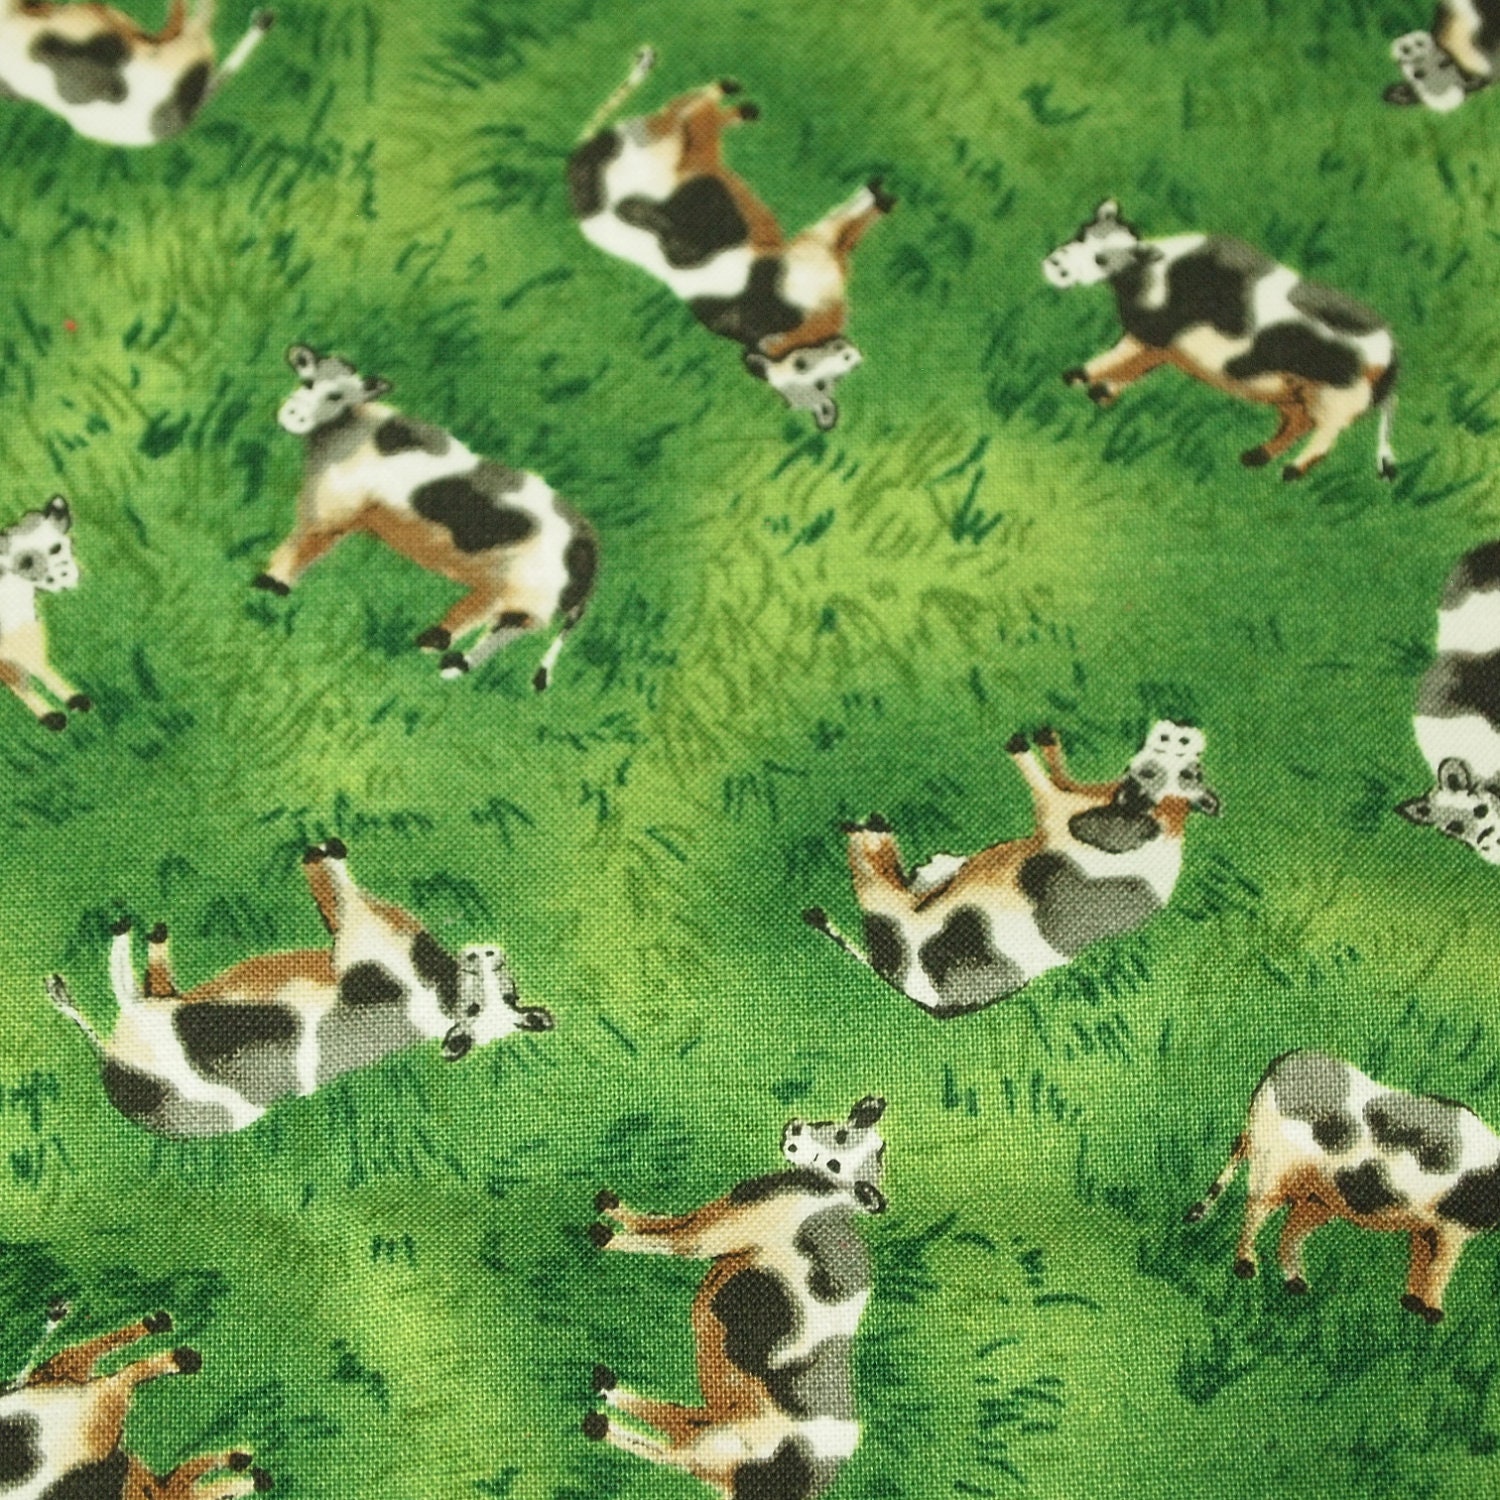 cute-cow-print-novelty-fabric-46x-35-by-vintagevice-on-etsy